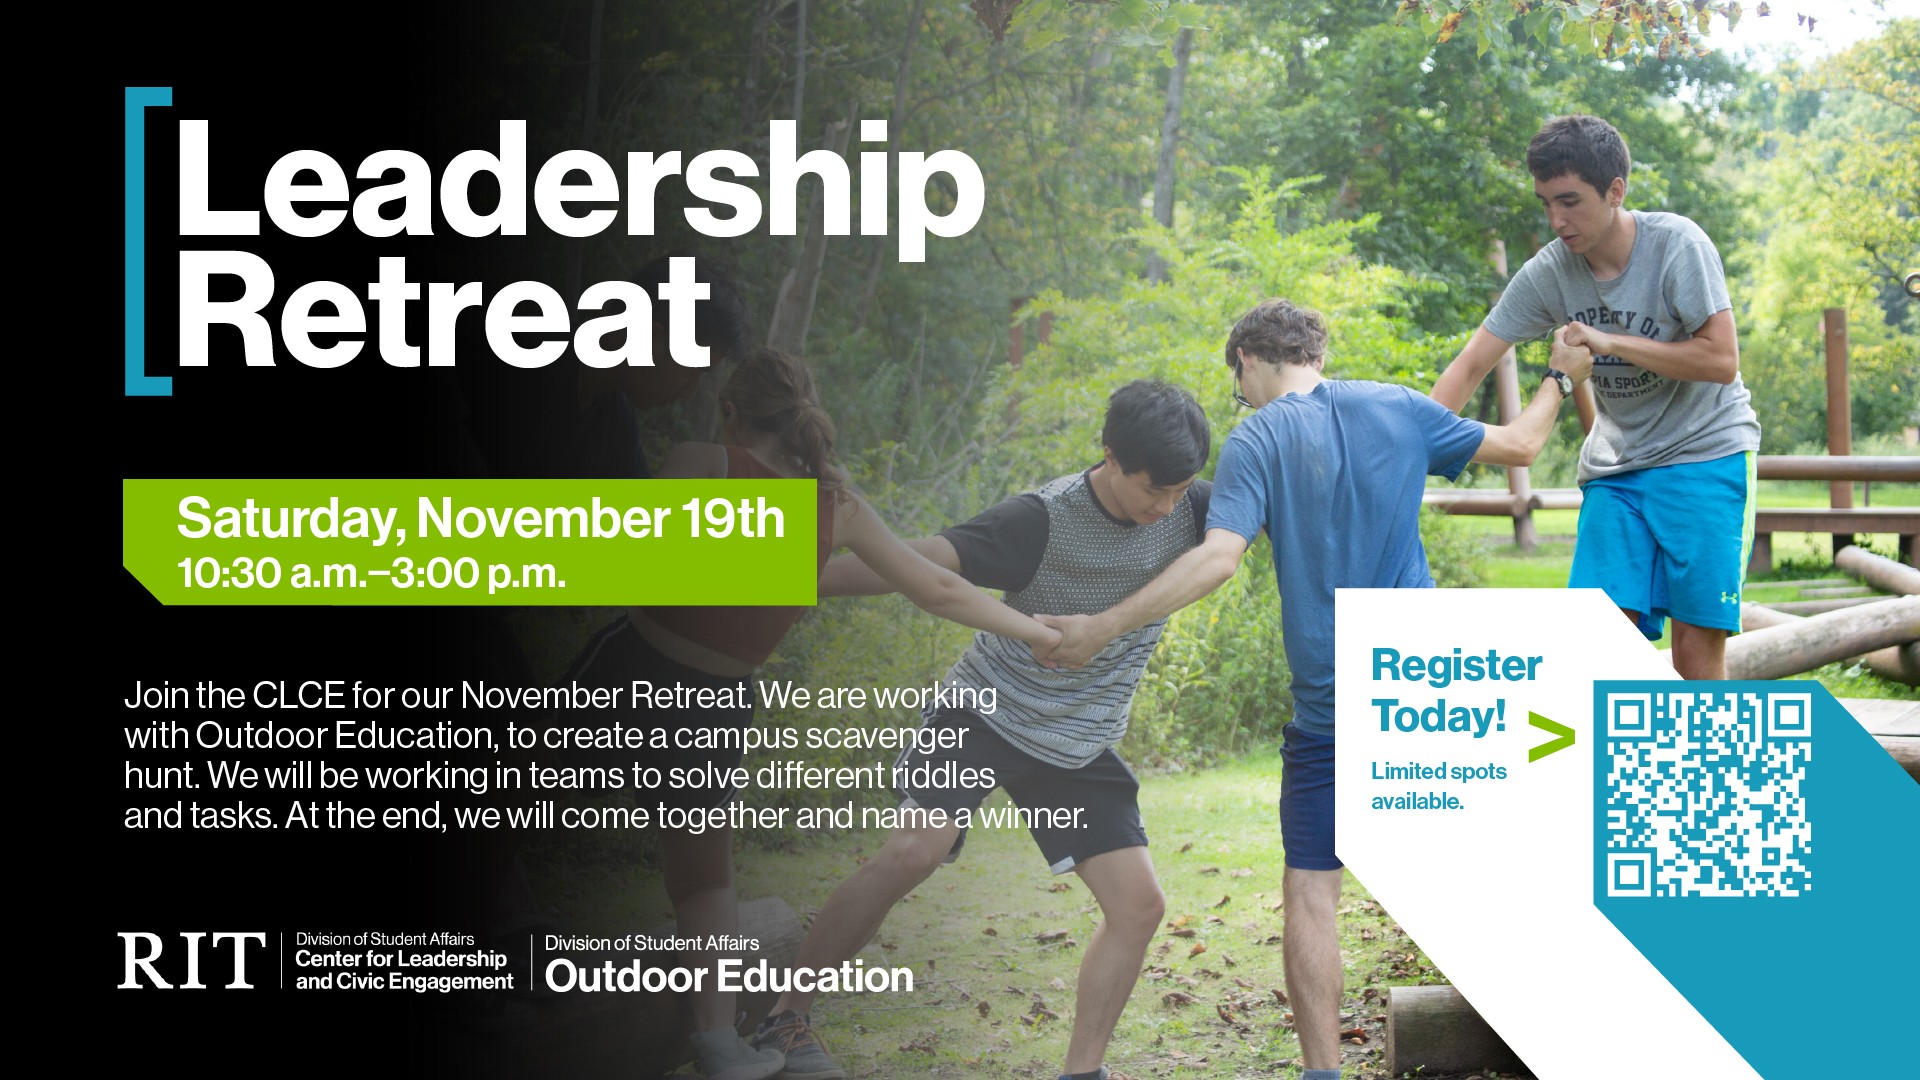 Leadership Retreat Graphic with image of students completing an obstacle course. Includes QR Code to registration link.